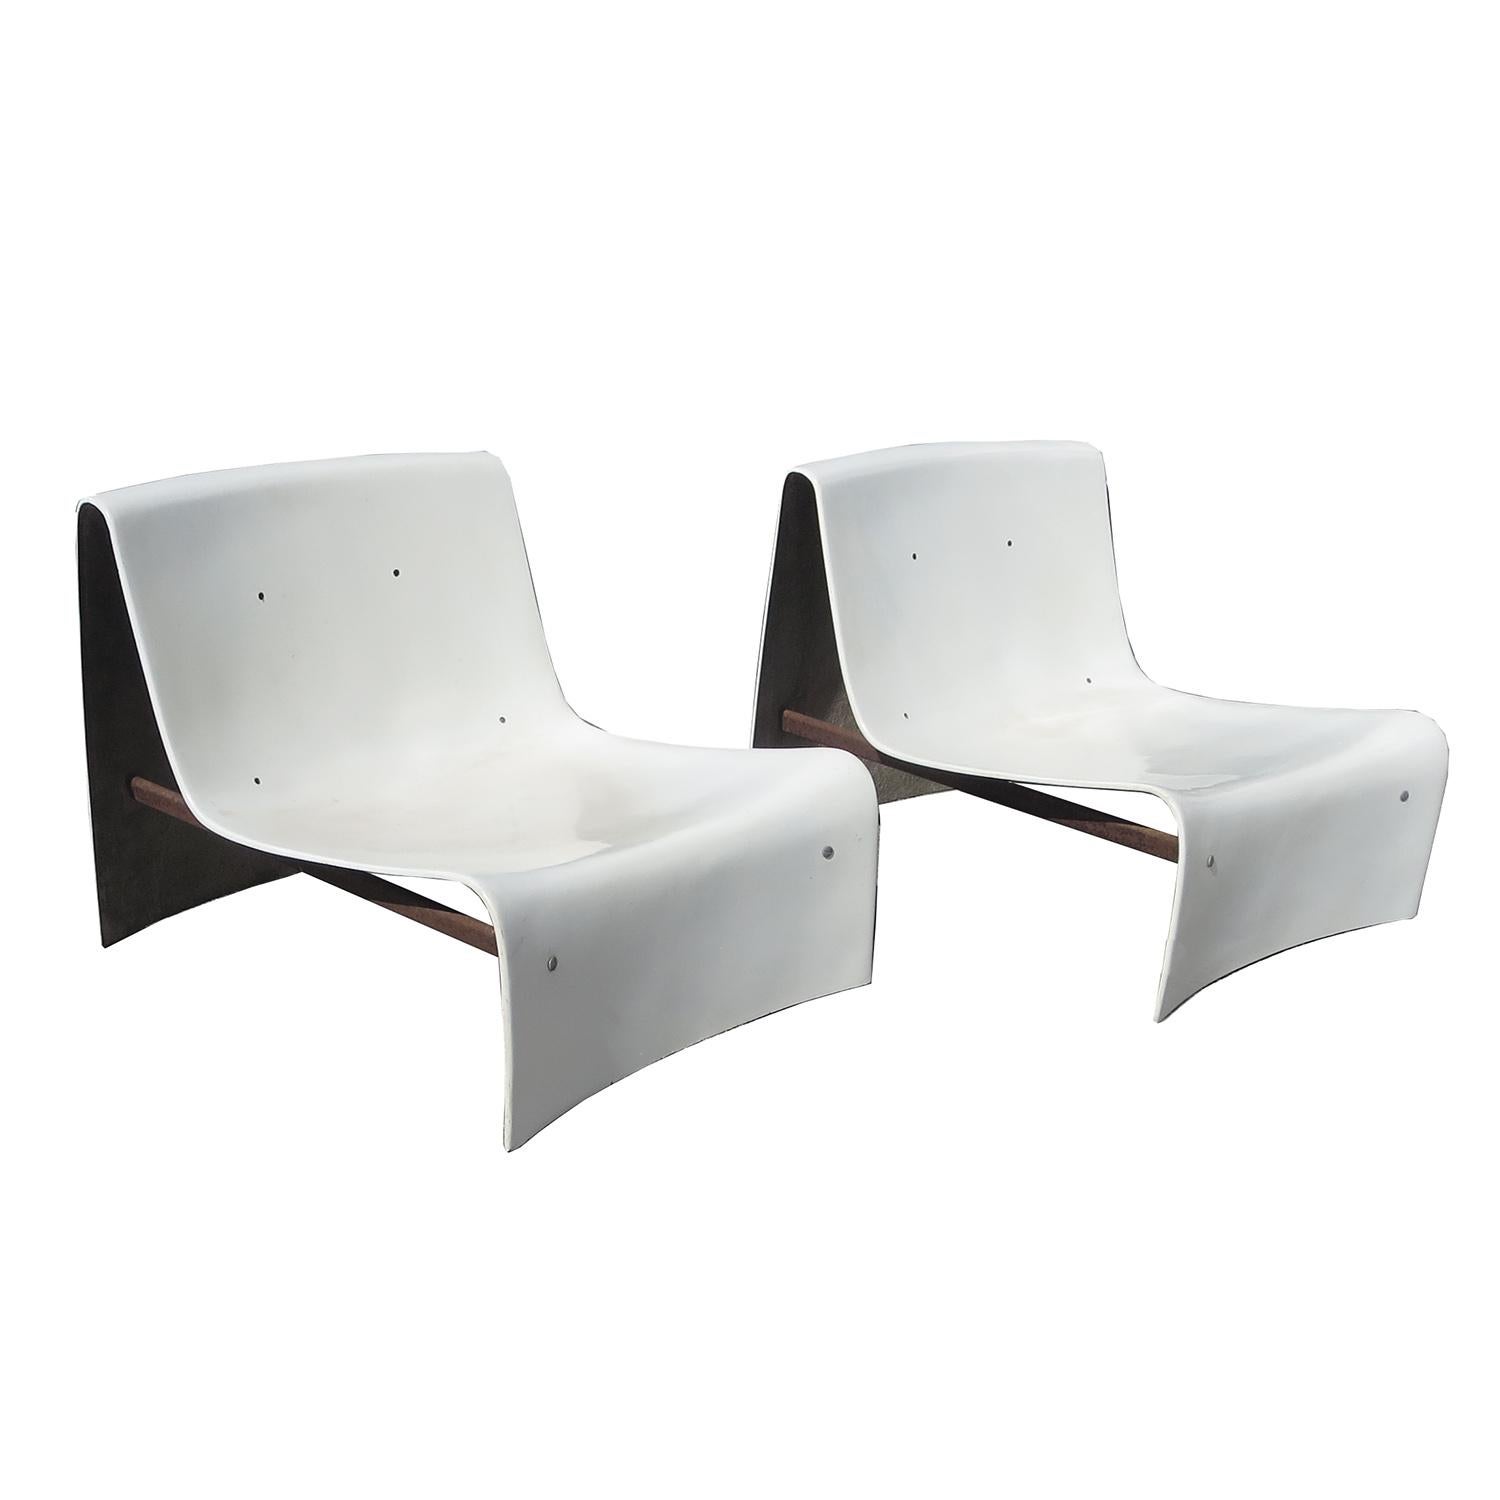 These stylish chairs are Italian in origin, by an unknown designer. The shells are molded fiberglass, with twin steel bar supports underneath for stability. The chairs are all original, and show natural wear, consistent with age.